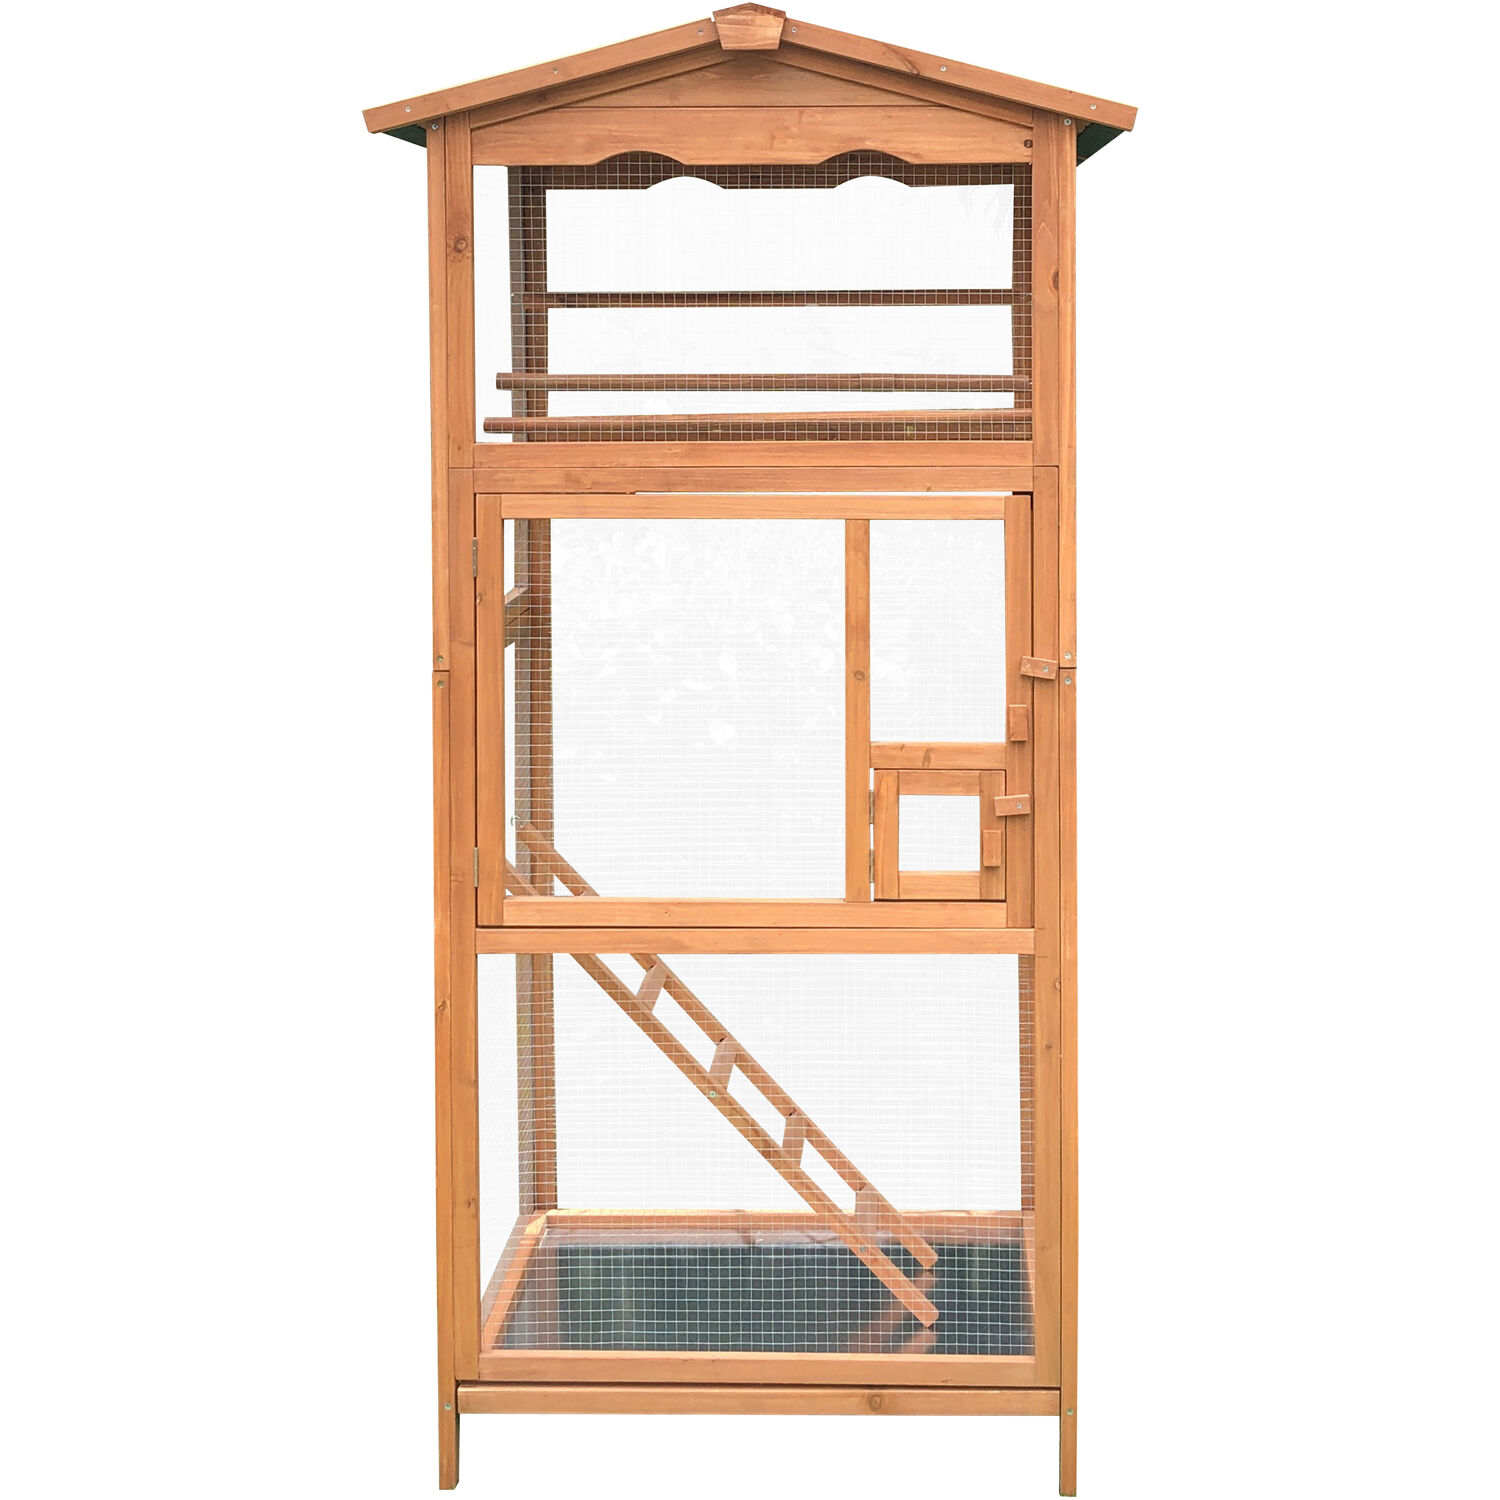 Hanover Outdoor Wooden Bird Cage with 3 Resting Bars, Ladder, Waterproof Roof and Removable Tray, 2.9 Ft. x 2.1 Ft. x 5.8 Ft. - image 1 of 12